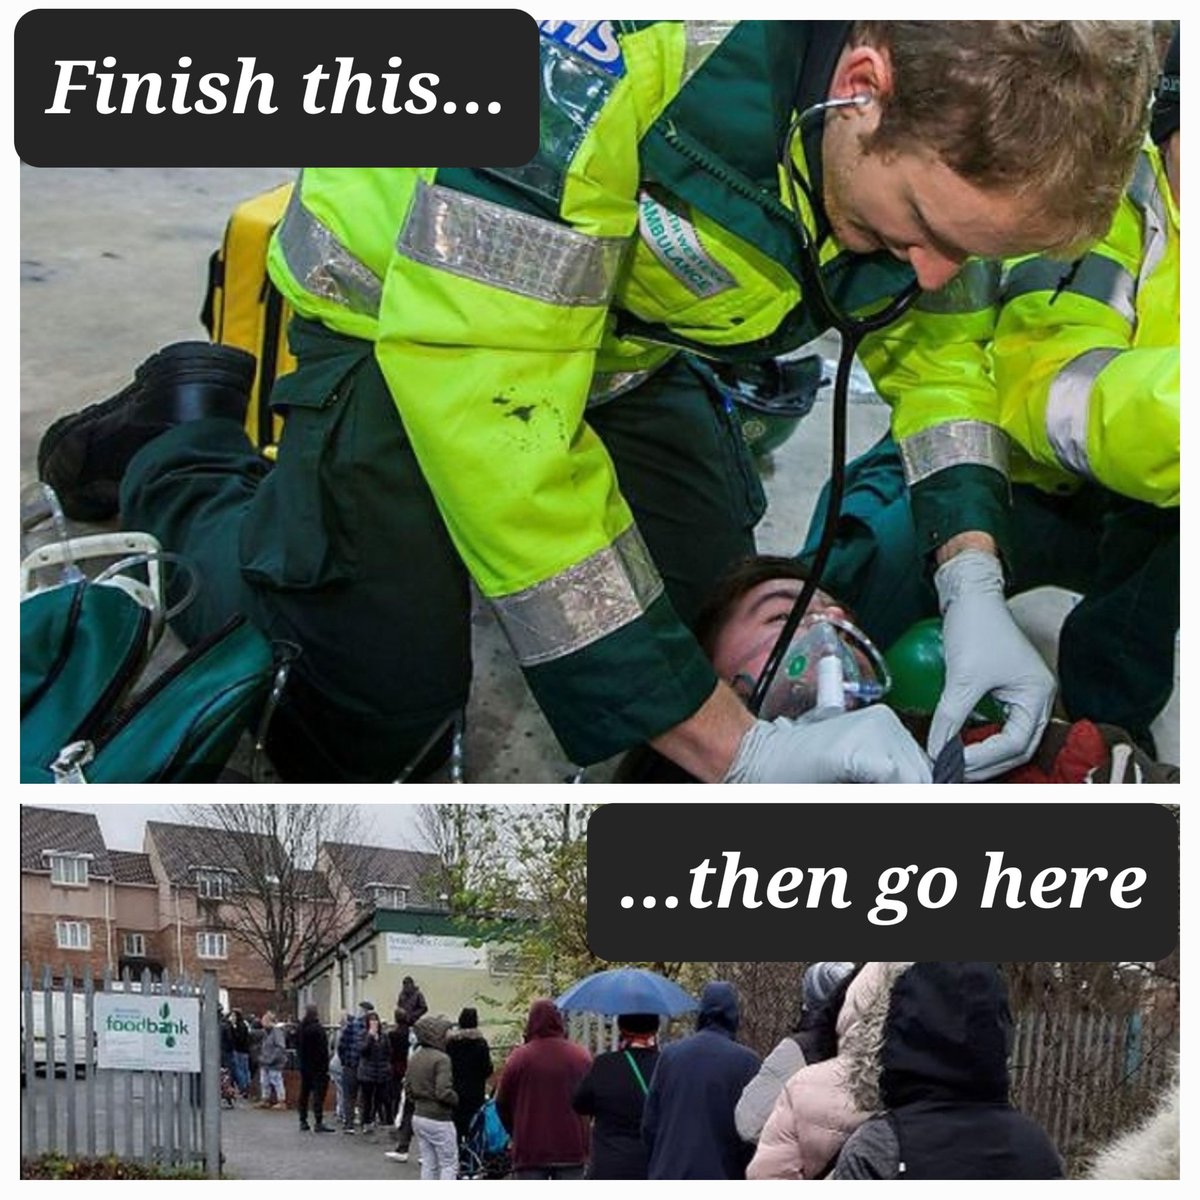 Our paramedics/Call Handlers/111 staff and all those out on strike today, provide life saving interventions every day.

They should not be worrying about where their next meal is coming from, or if they can keep their children warm.

#EnoughlsEnough 
#fairpayfornhs
#fairpayforall